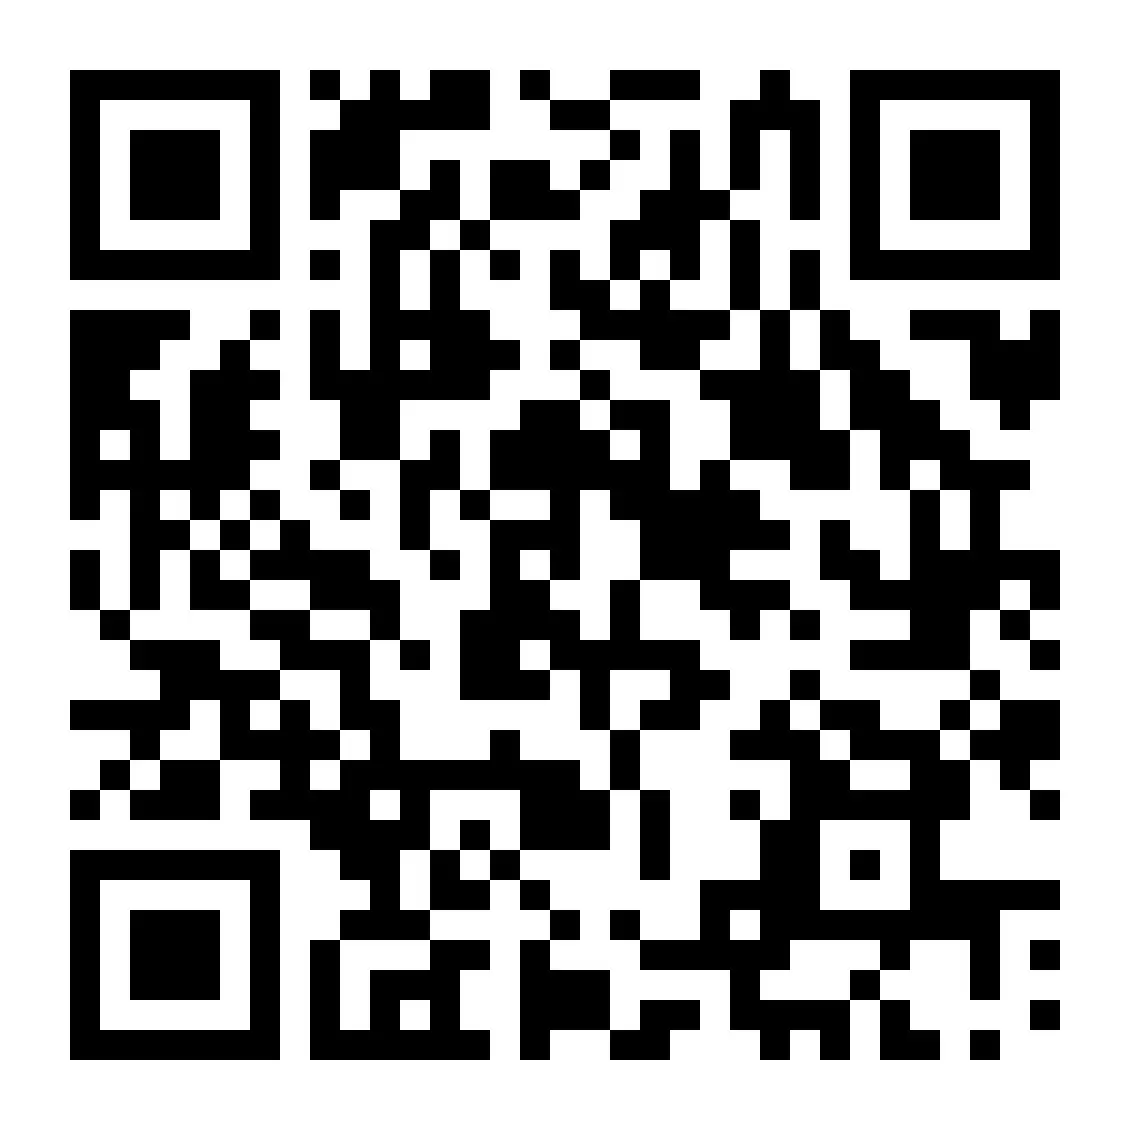 QR hybrid to download the app